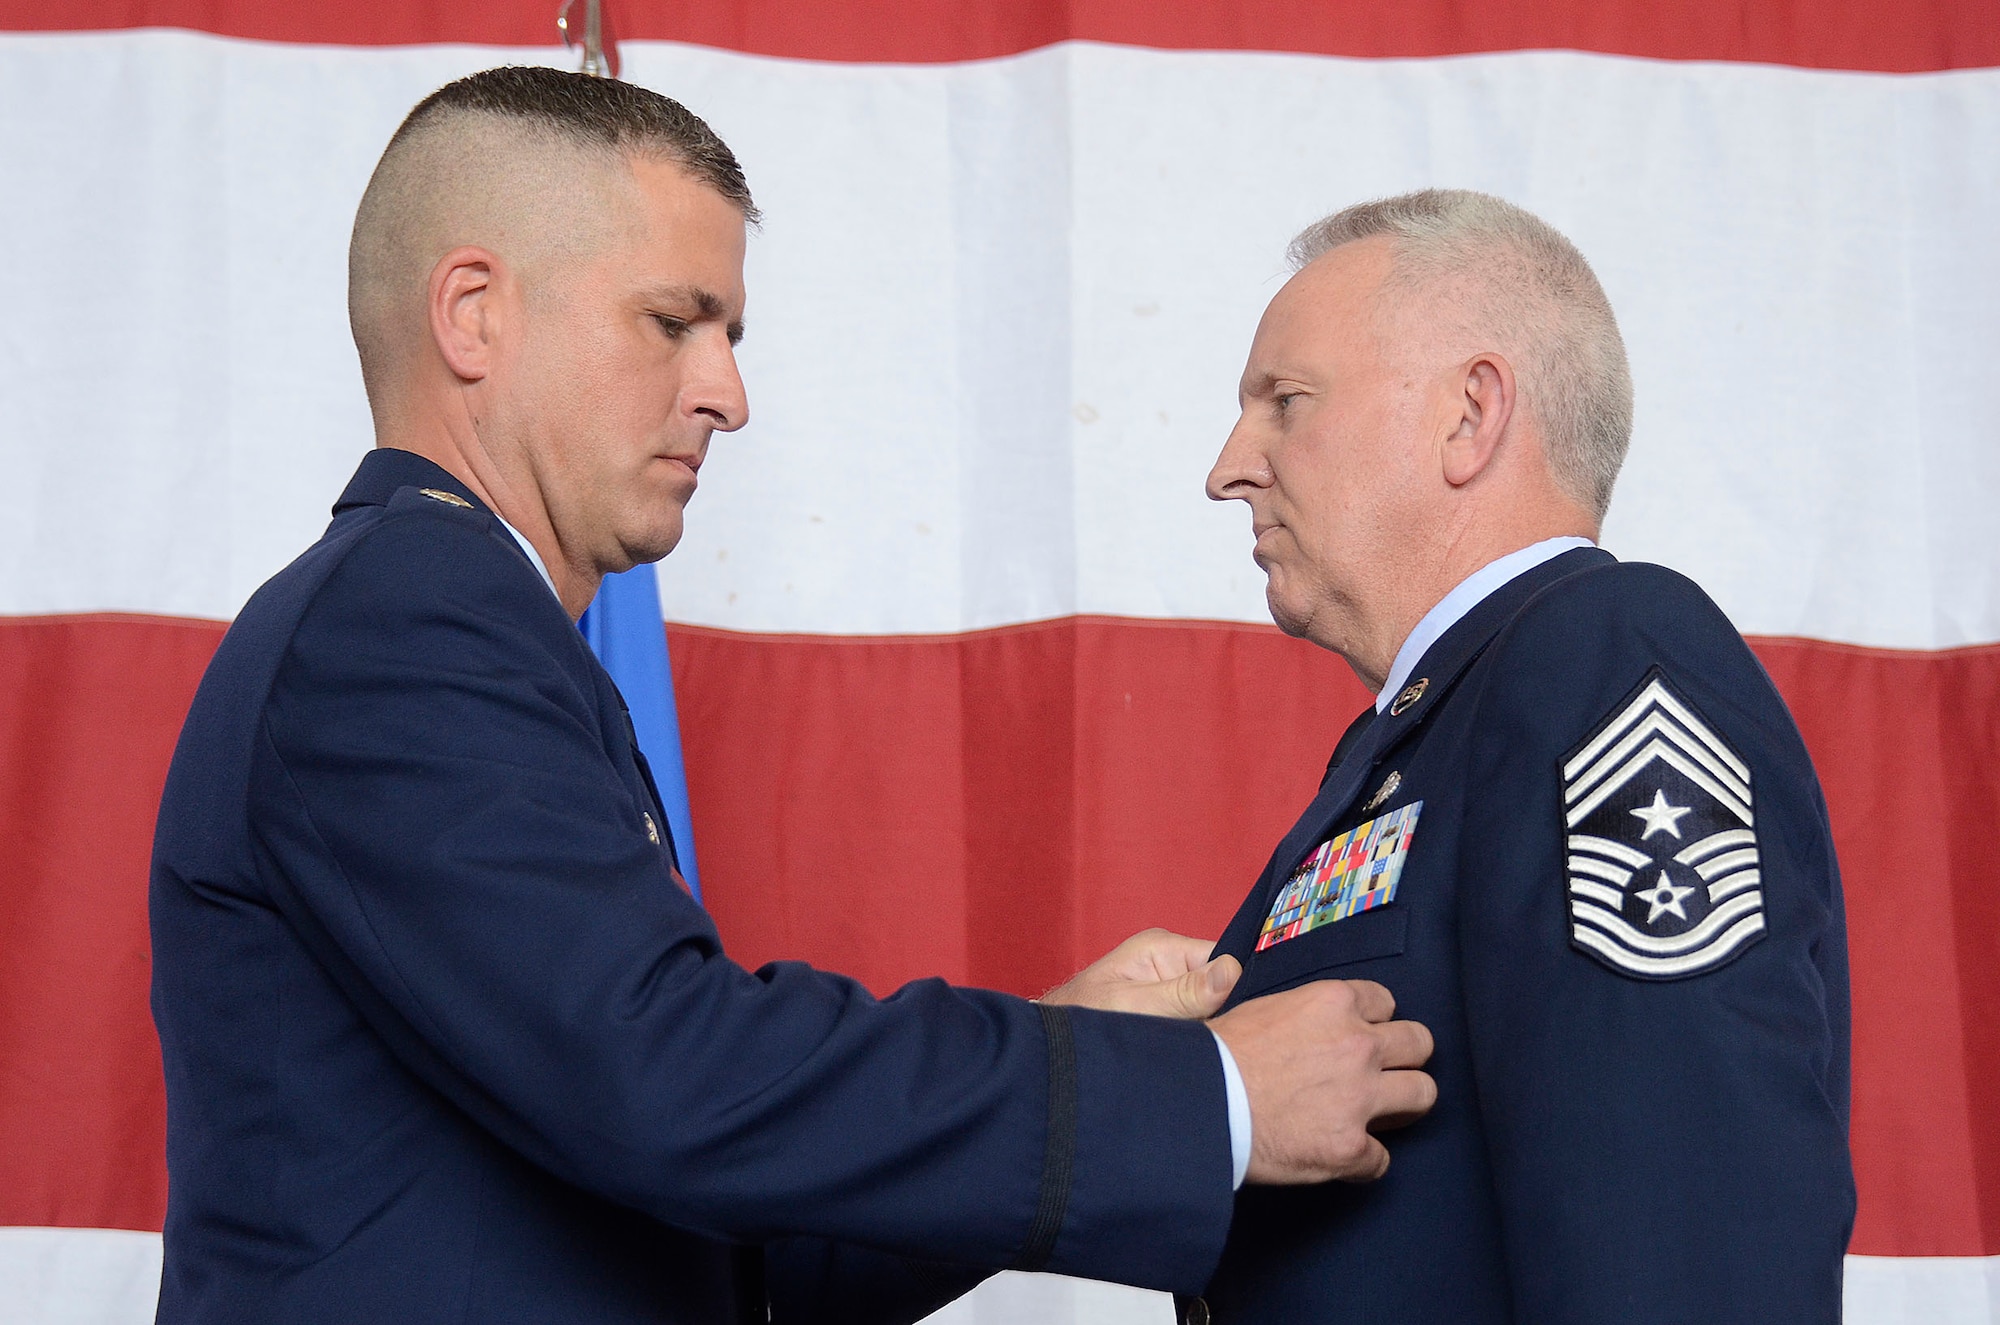 Col. Timothy Martz, 94th Security Forces commander, retires police badge number 010749 from Chief Master Sgt. Wendell Peacock, 94th Airlift Wing command chief, and the U.S. Air Force during his retirement ceremony at Dobbins Air Reserve Base, Aug. 2014. Peacock served as a security forces member for 30 years. (U.S. Air Force photo/Don Peek)